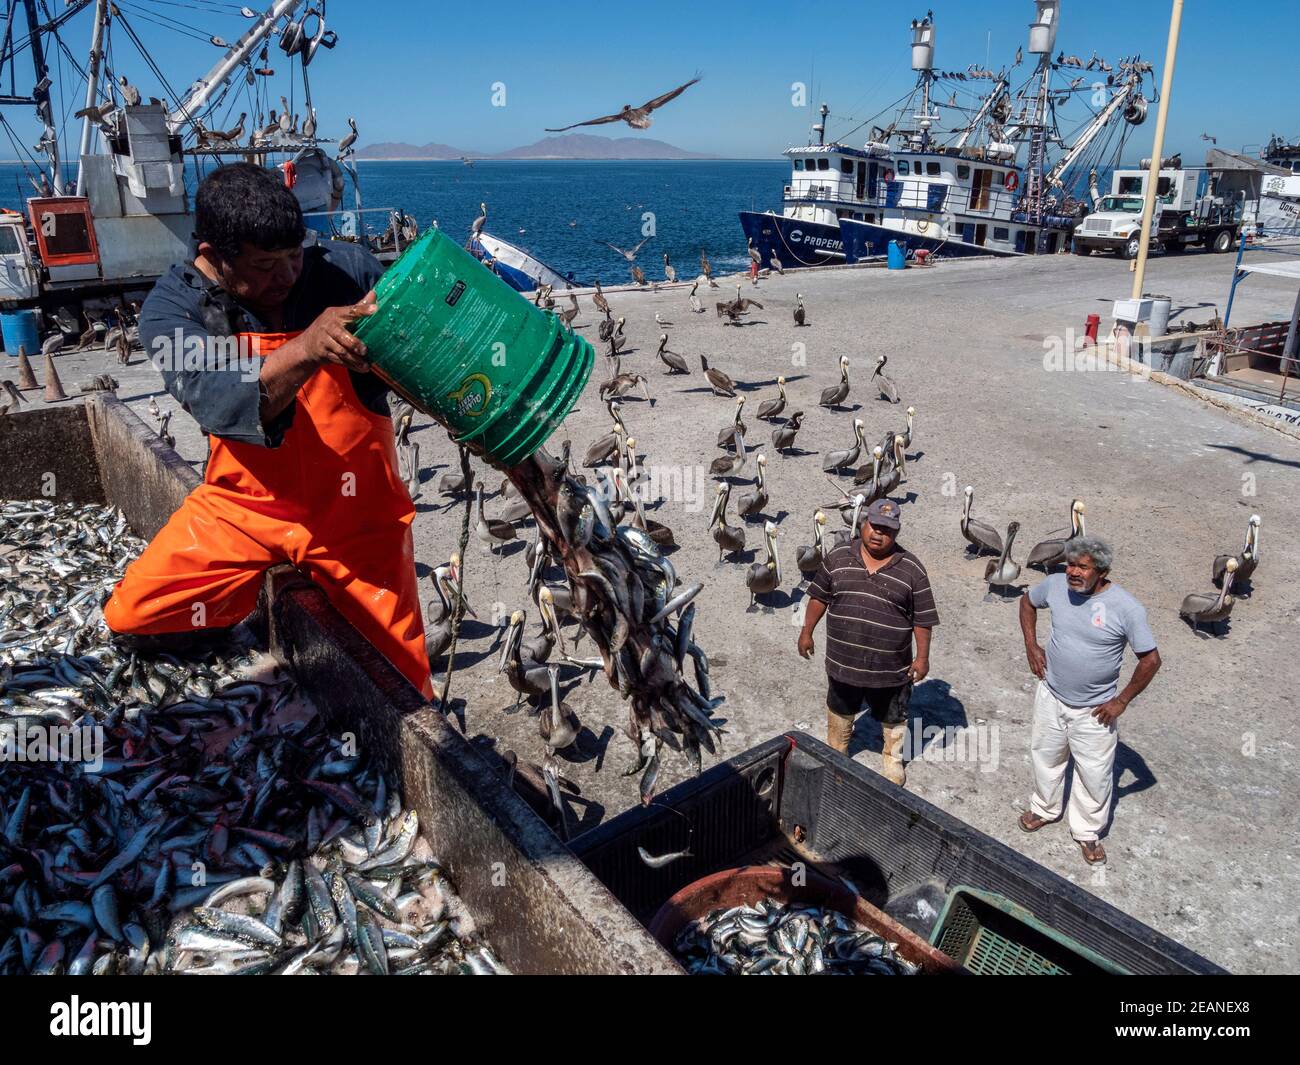 Days catch of sardines being sorted at a fish processing plant in Puerto San Carlos, Baja California Sur, Mexico, North America Stock Photo